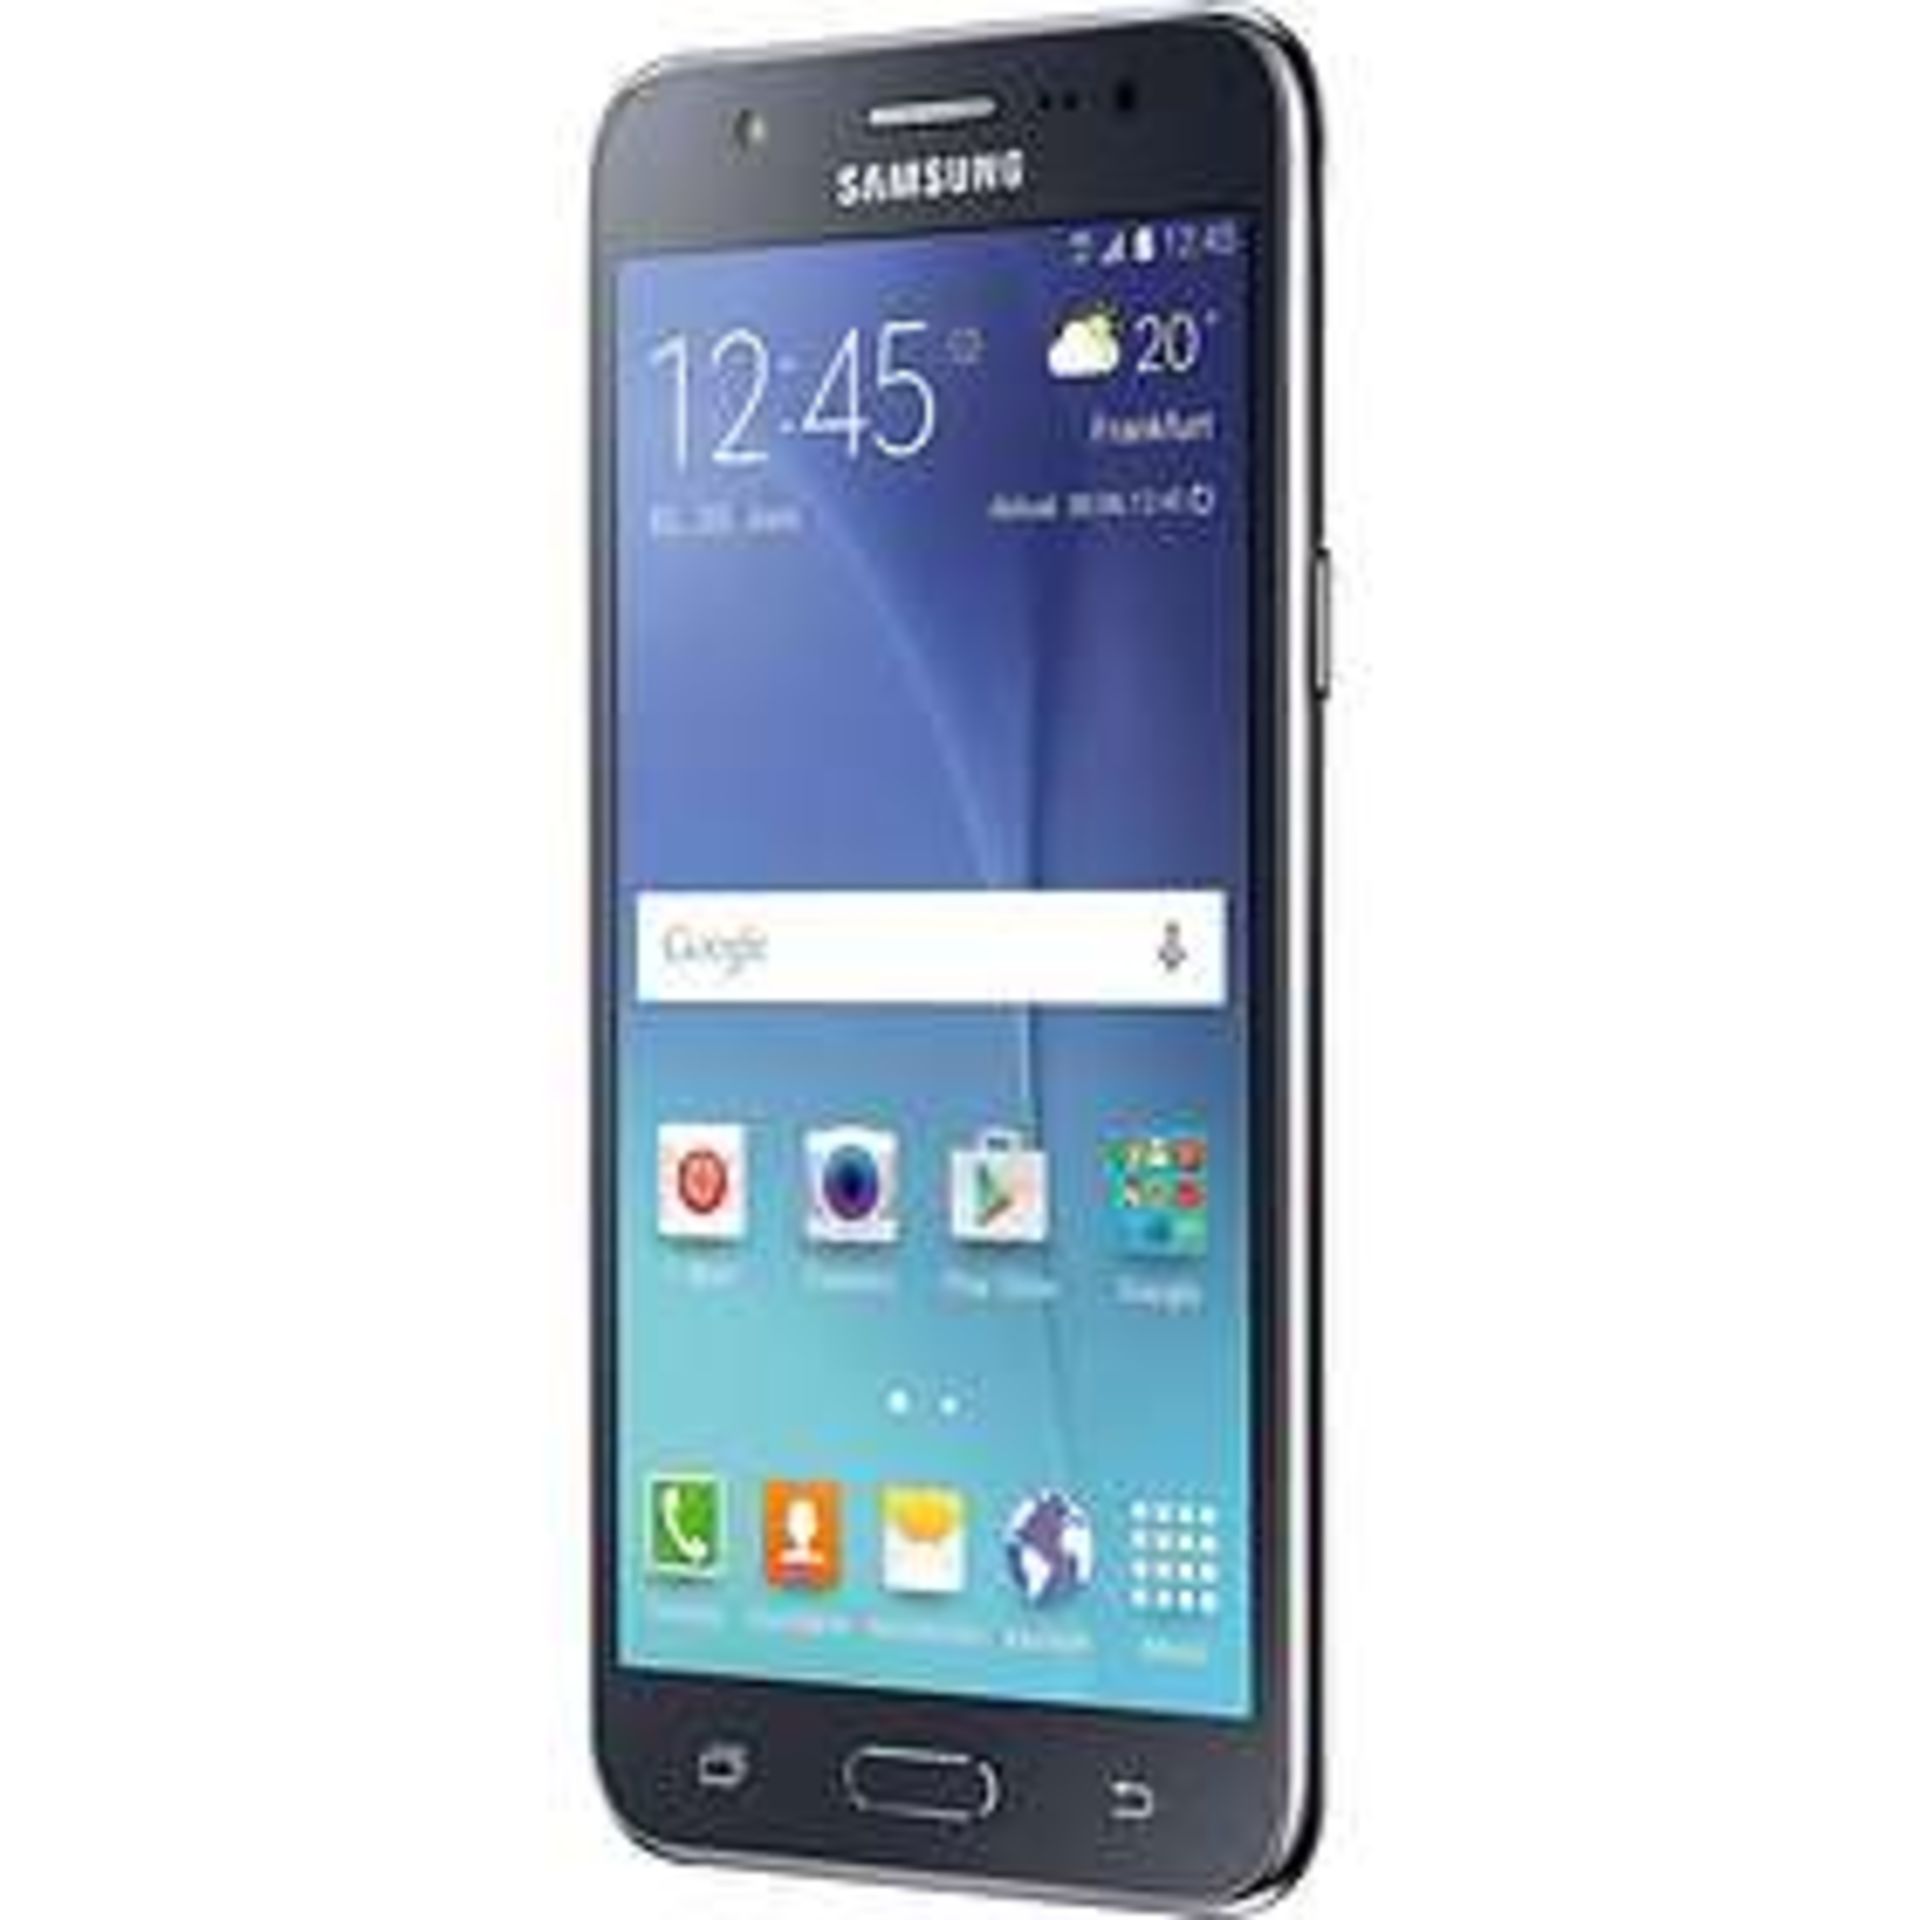 Grade A Samsung J5 (j500F 2015) Colours May Vary Item available approx 12 working days after sale